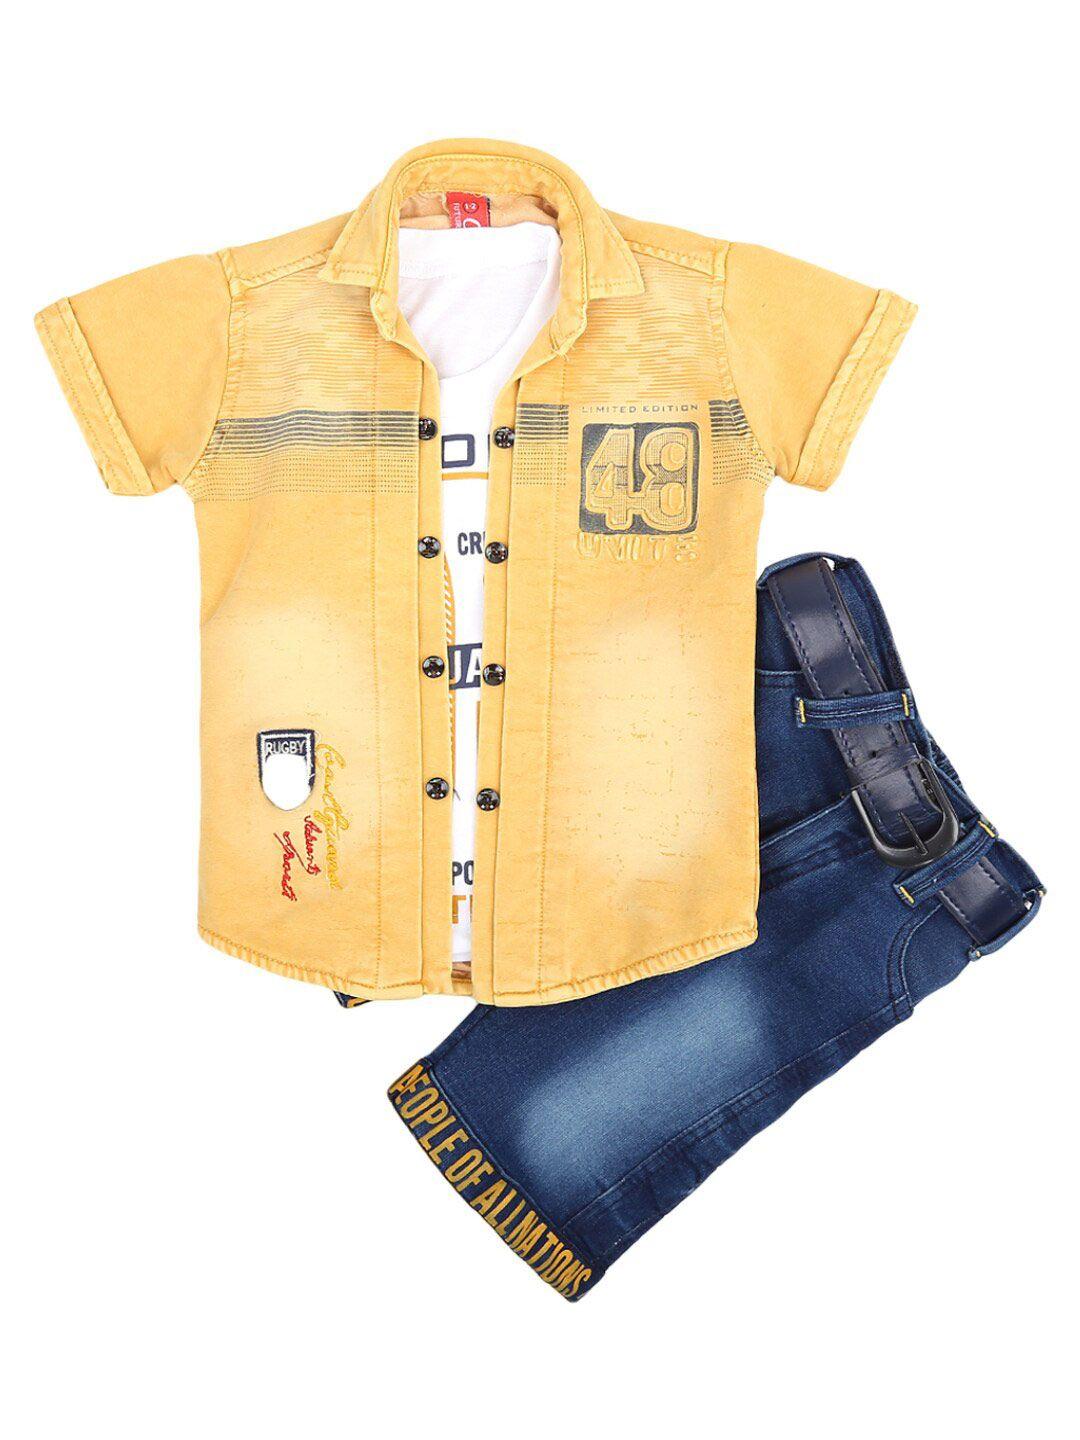 v-mart unisex kids yellow & blue printed shirt with capris